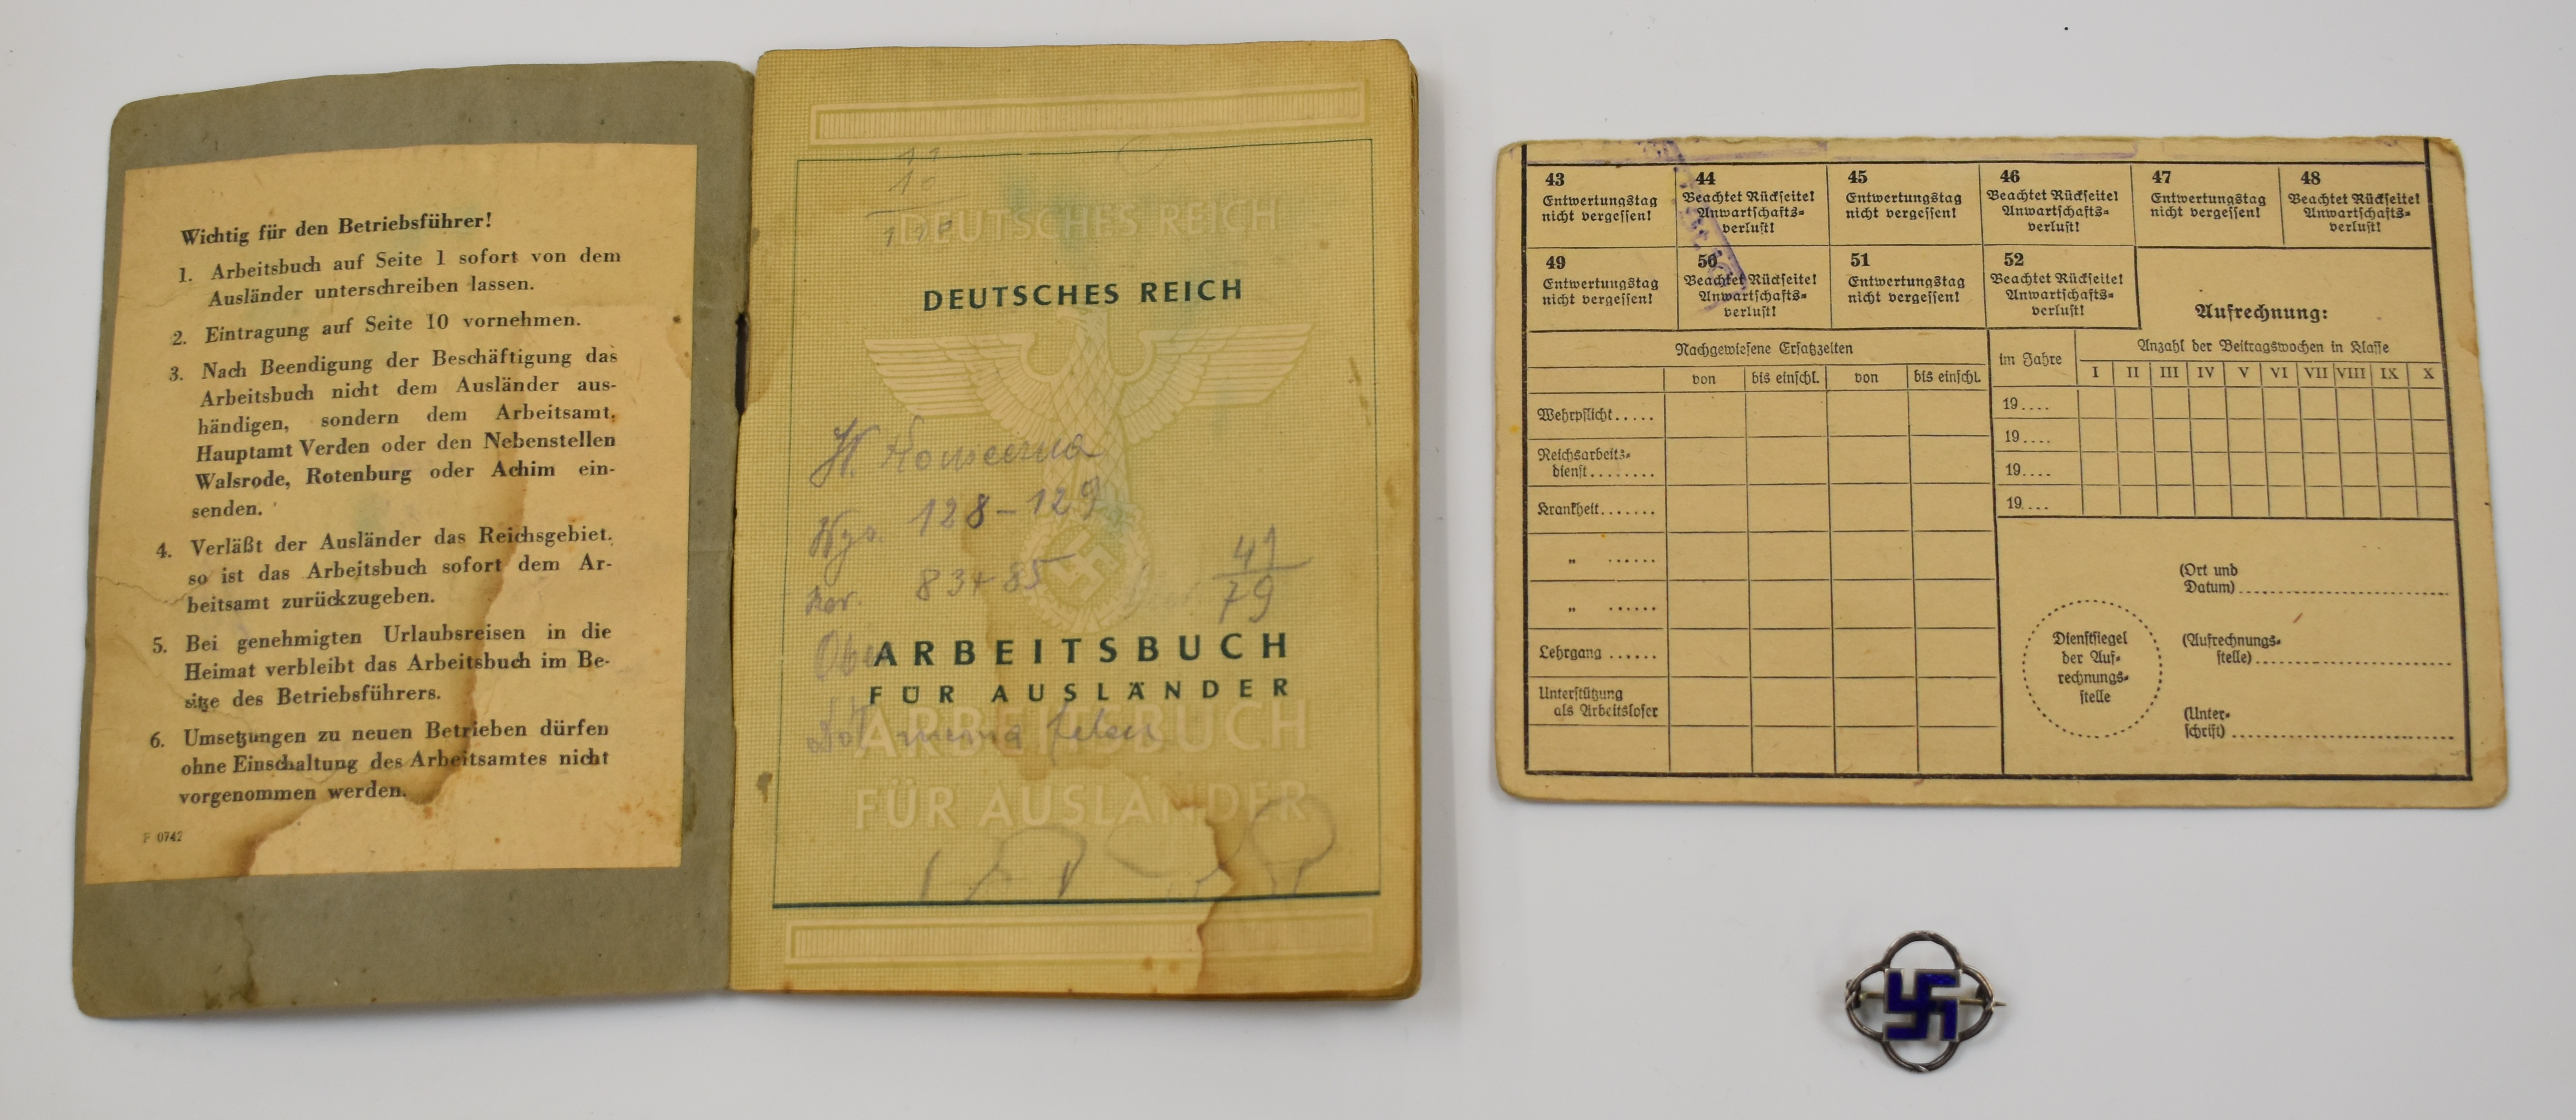 German WW2 Nazi Third Reich work book, card and hallmarked silver and enamel pin badge - Image 2 of 6